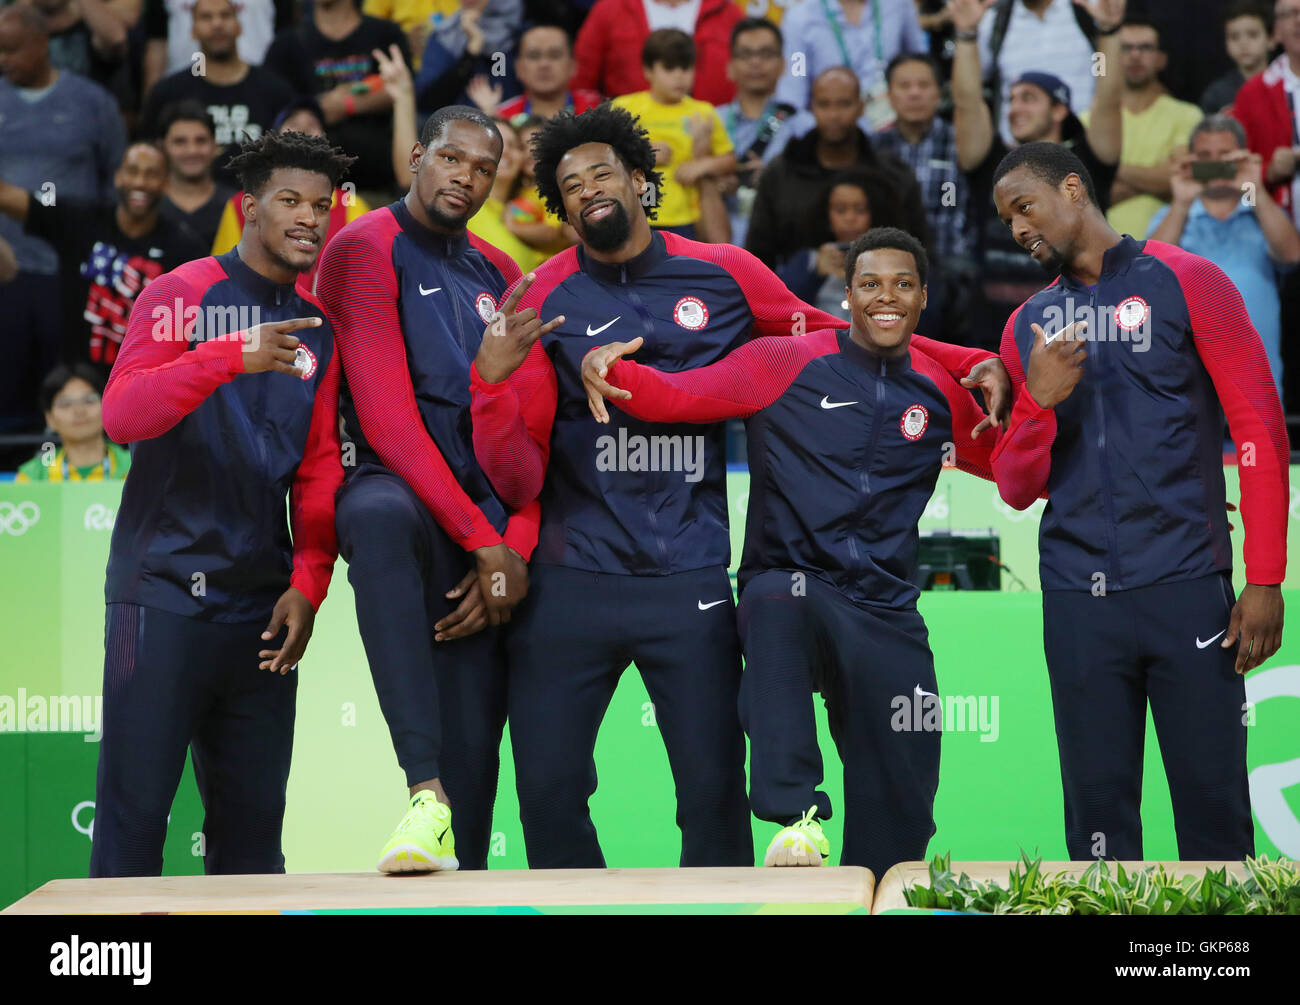 Rio De Janeiro Brazil 21st Aug 16 The Basketball Team Of The Usa Takes Part In The Medal Ceremony After Defeating Serbia During The Basketball Men S Gold Medal Game During The Rio